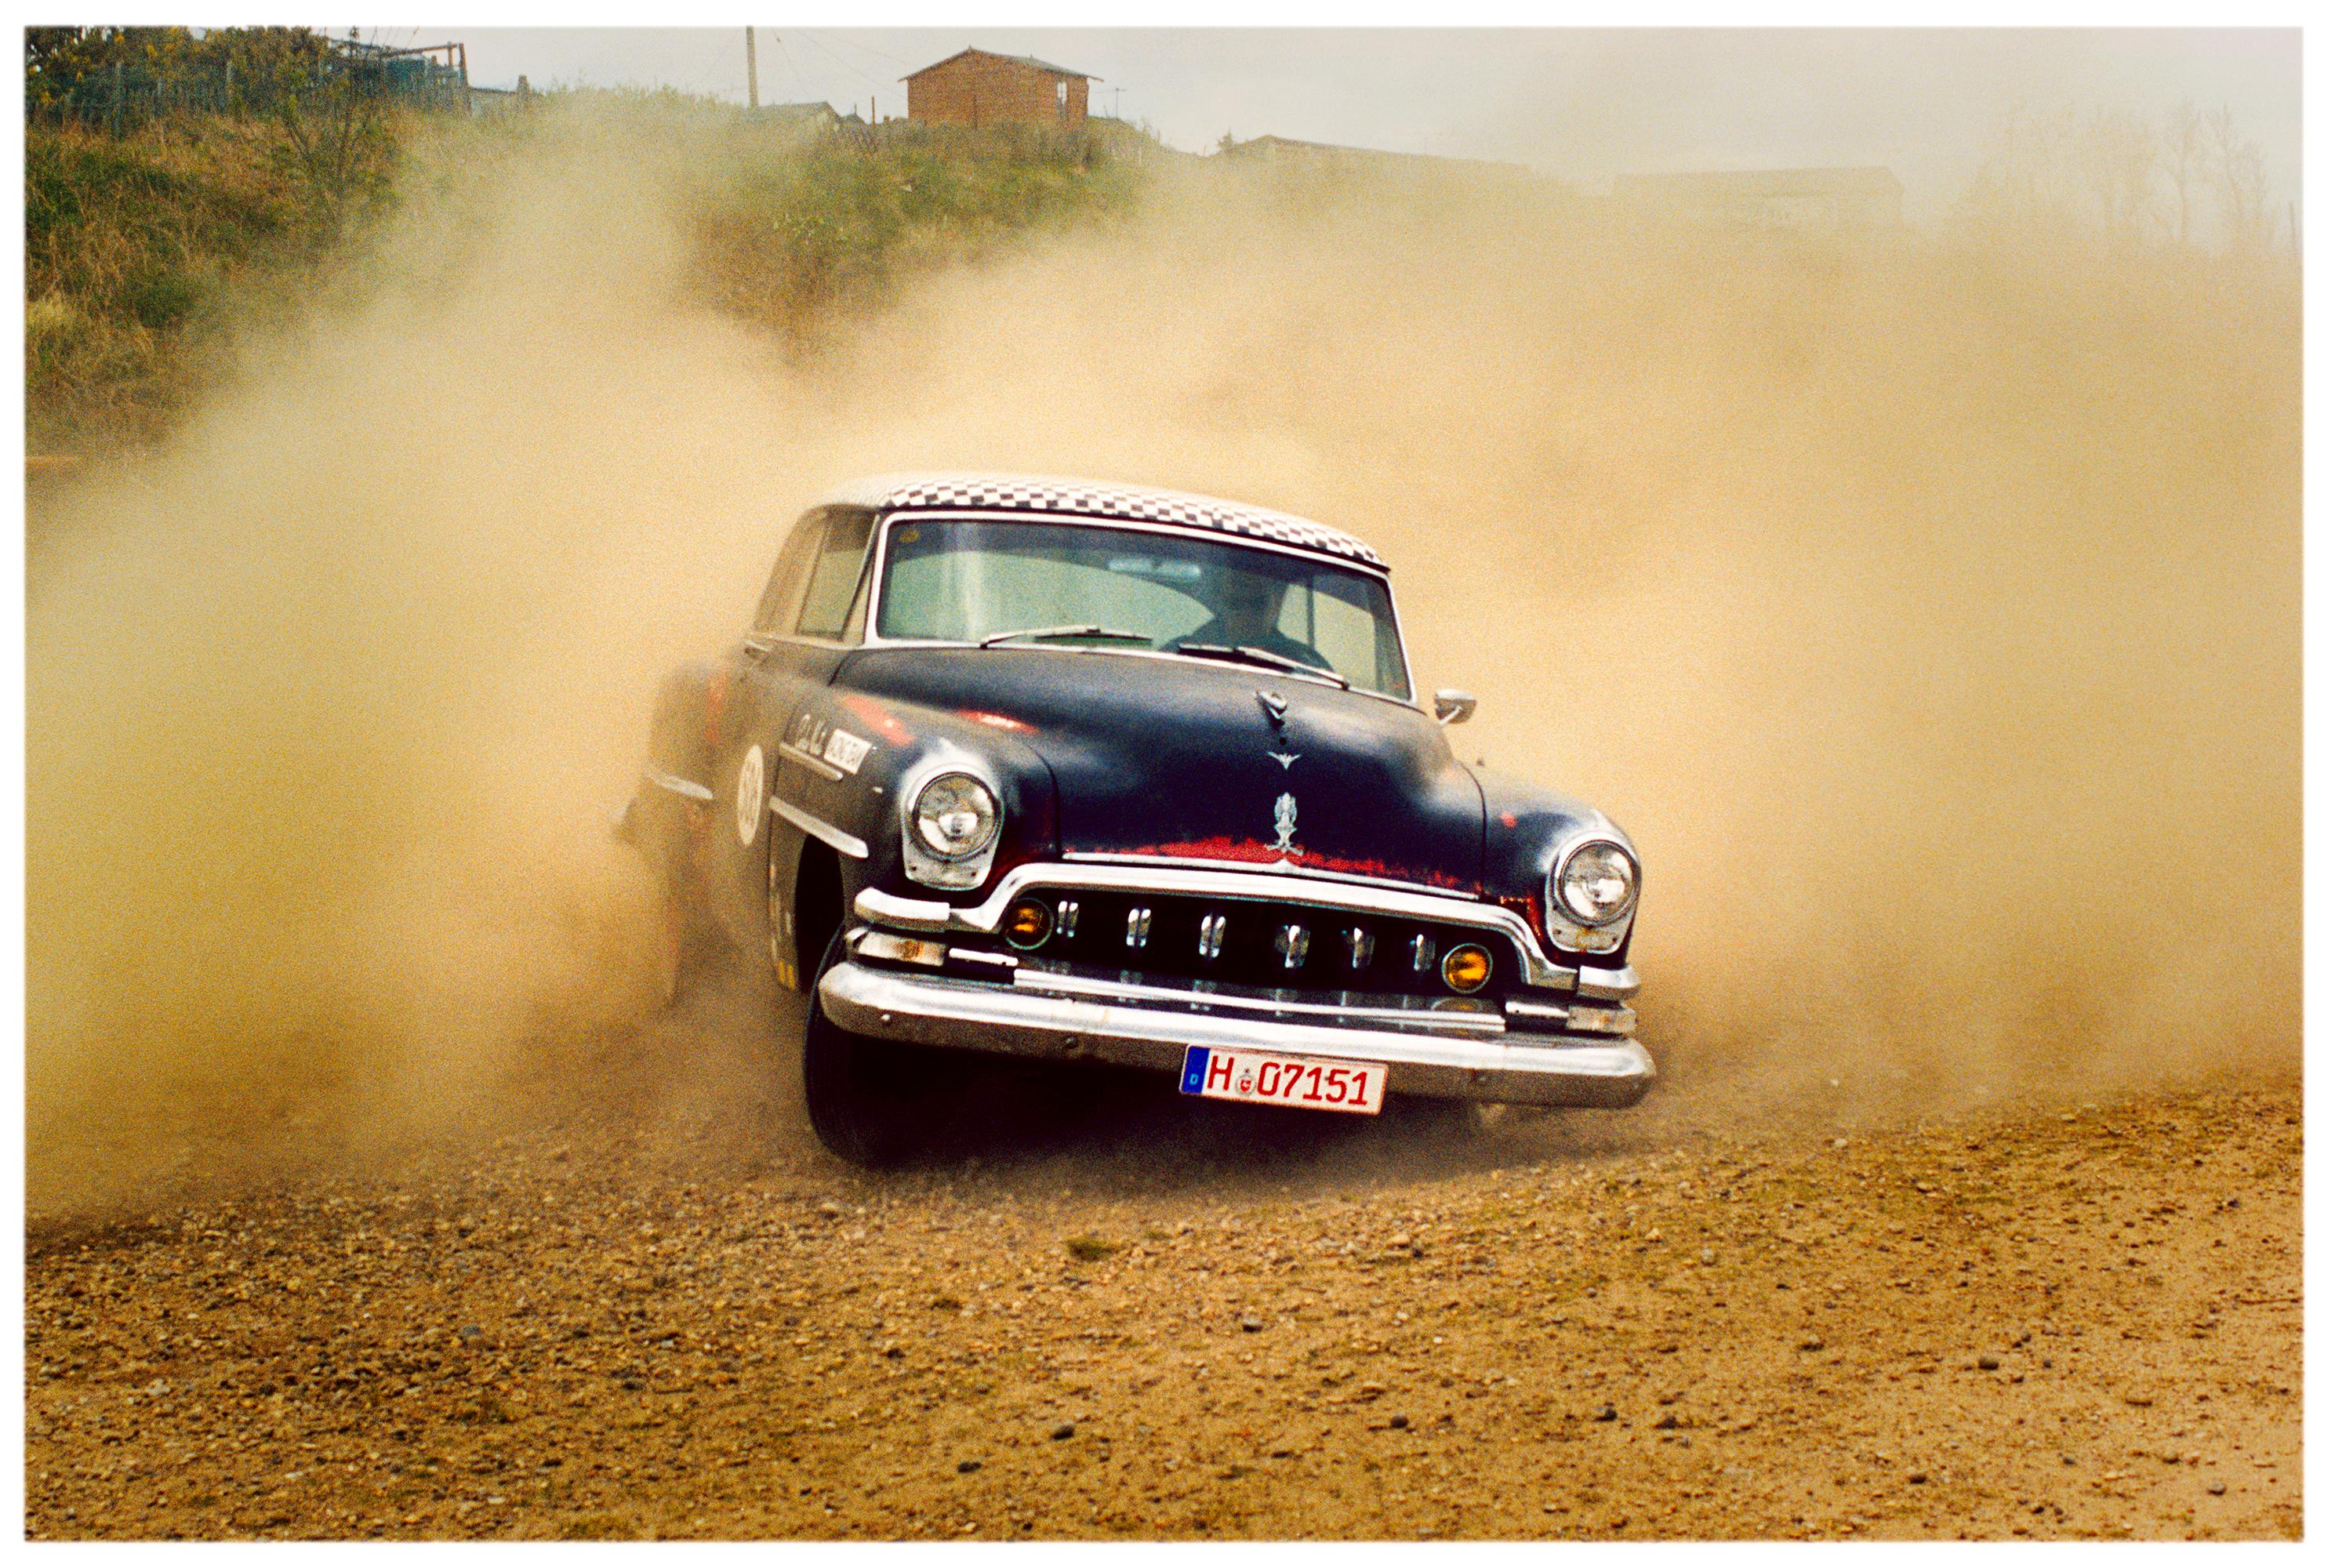 Richard Heeps Color Photograph - Donutting, Hemsby, Norfolk - Classic American Car Photography